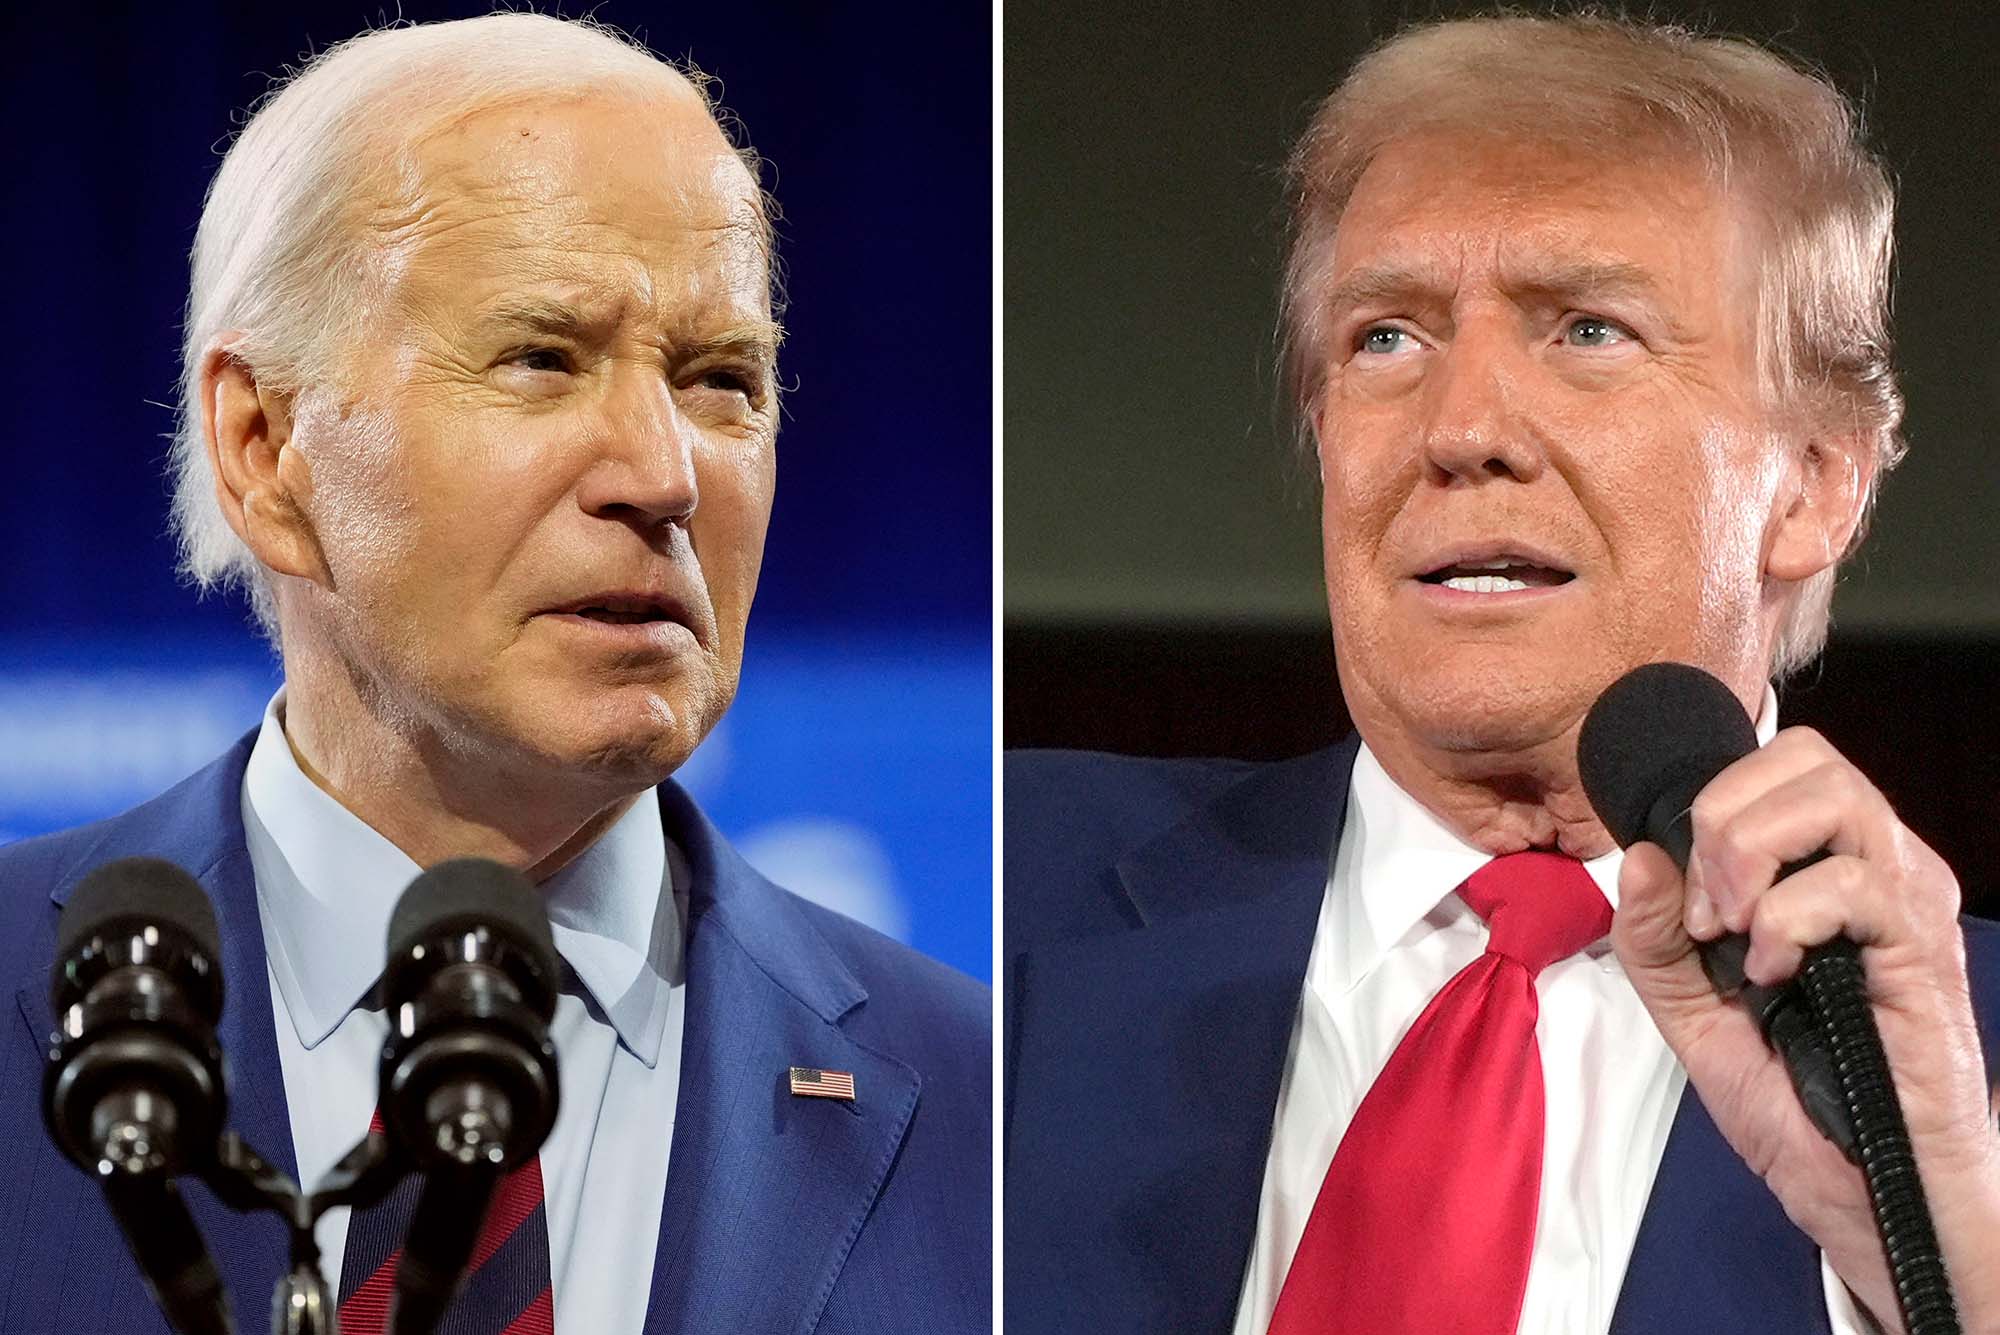 Photo: A composite image of two pictures of President Joe Biden (left) and former President Donald Trump